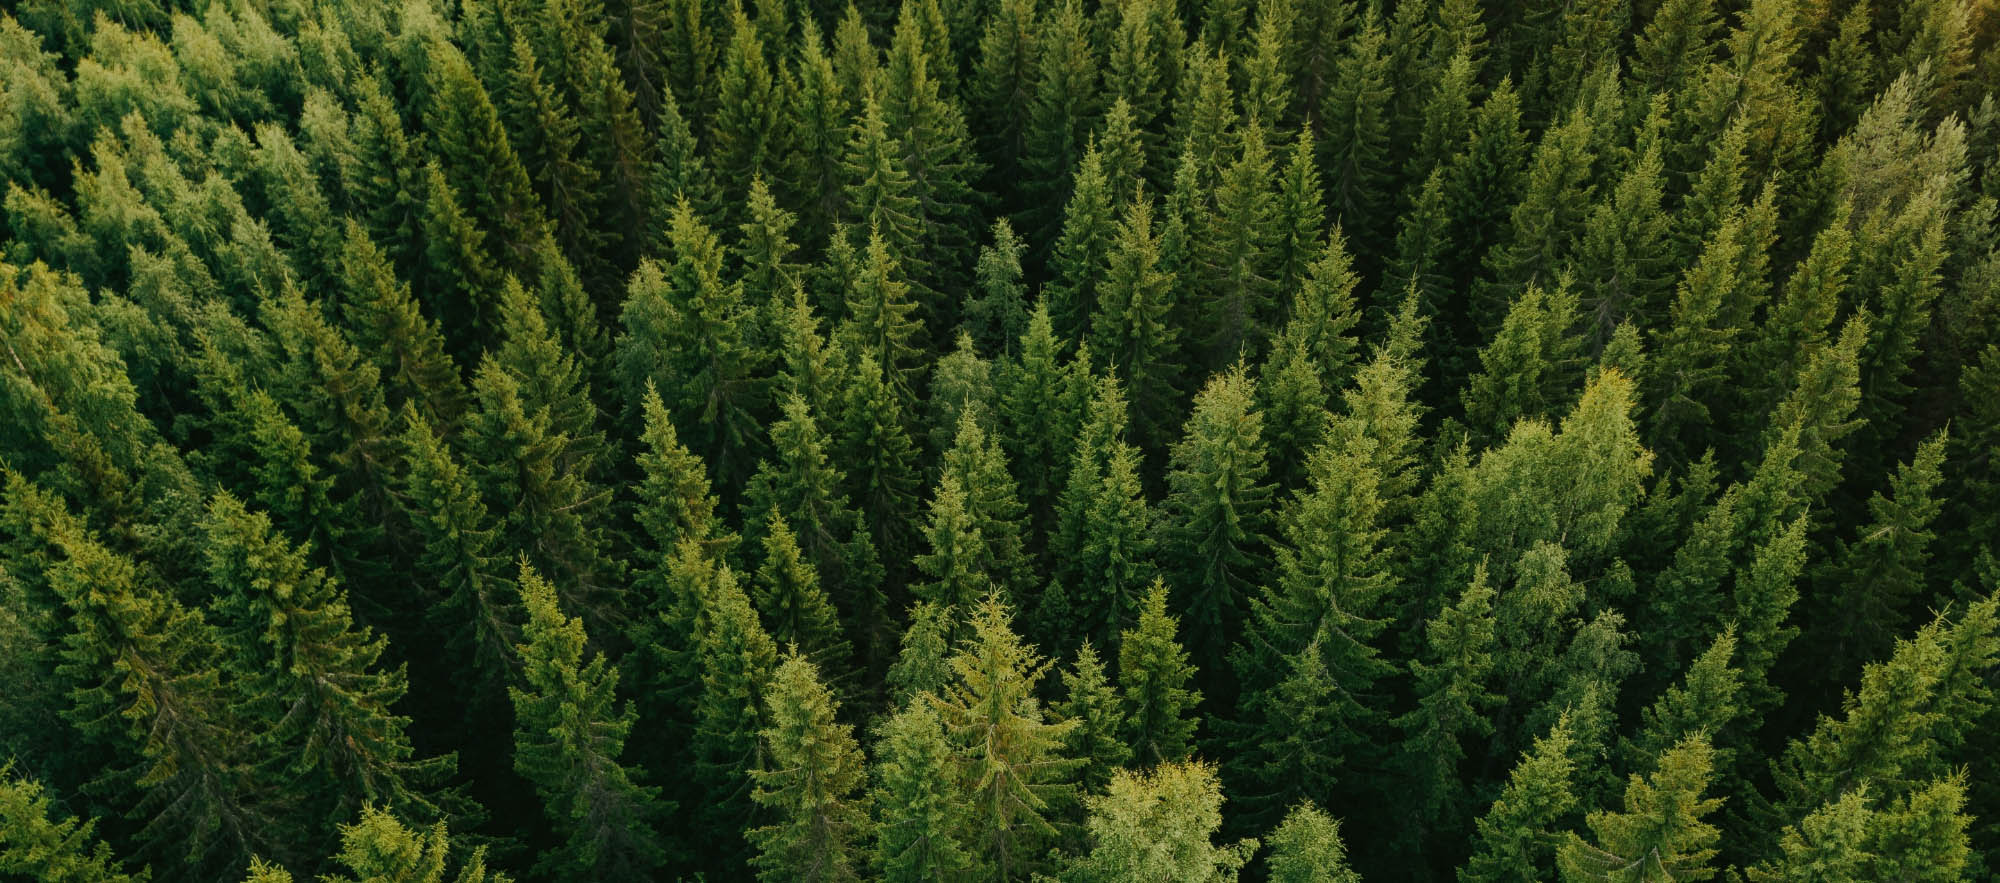 A green coniferous forest viewed from the top